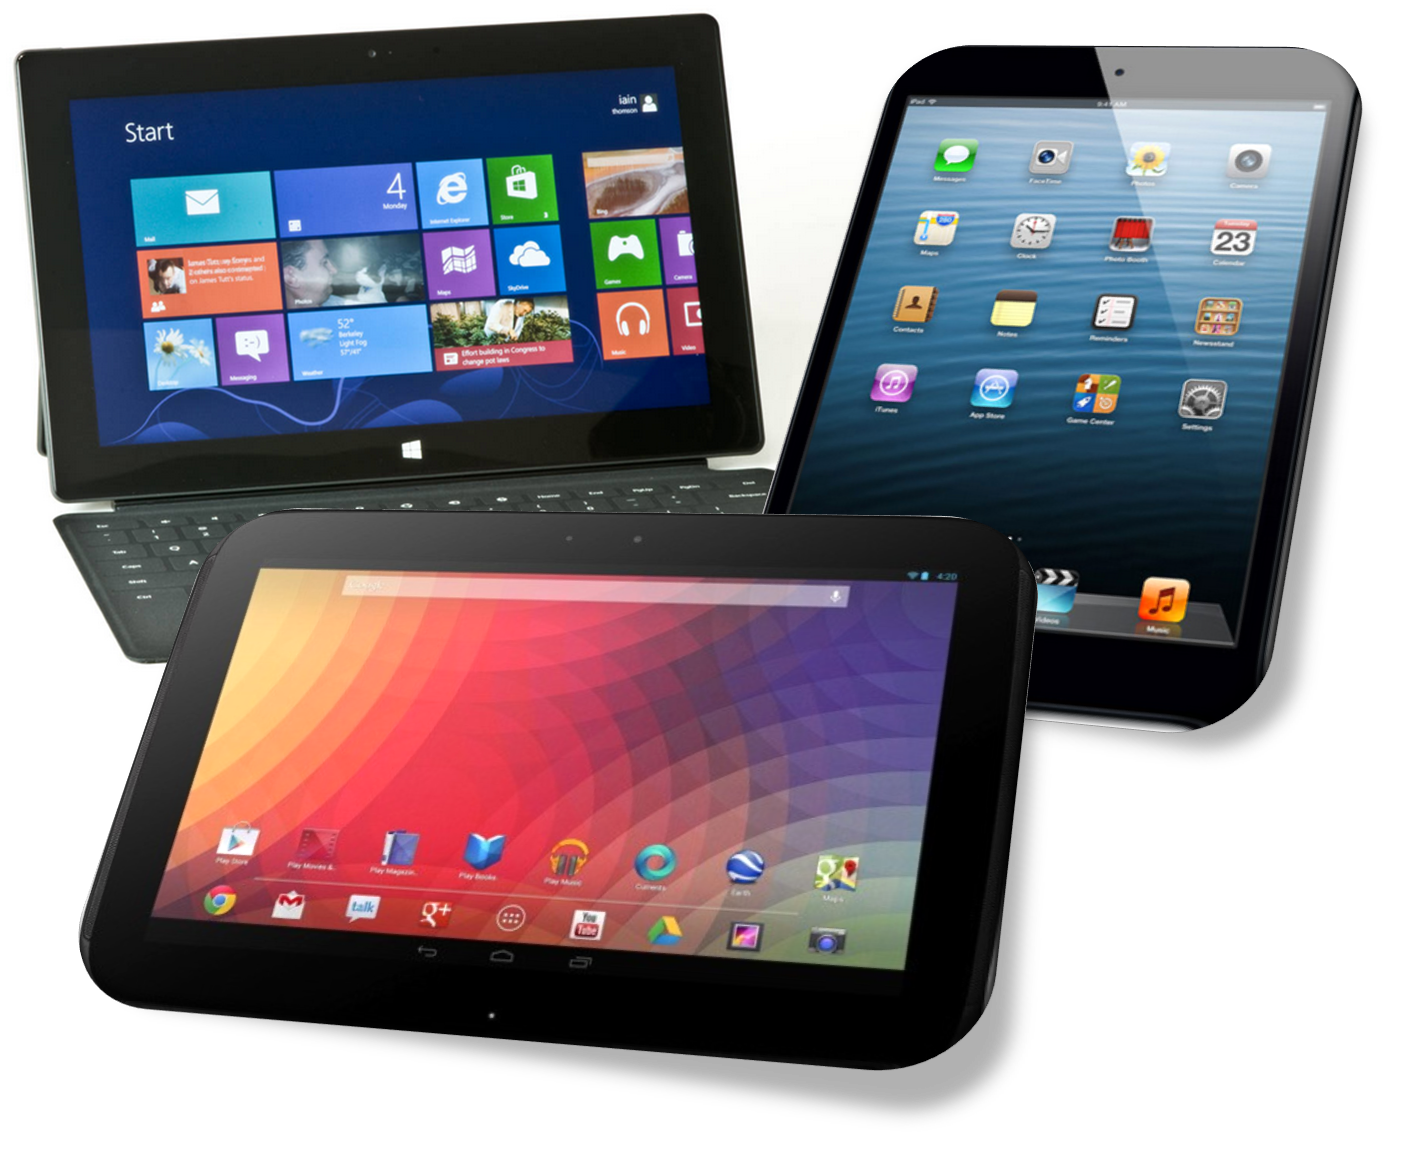 West Chester Technolgy Blog: The Tablet Killed the PC Star